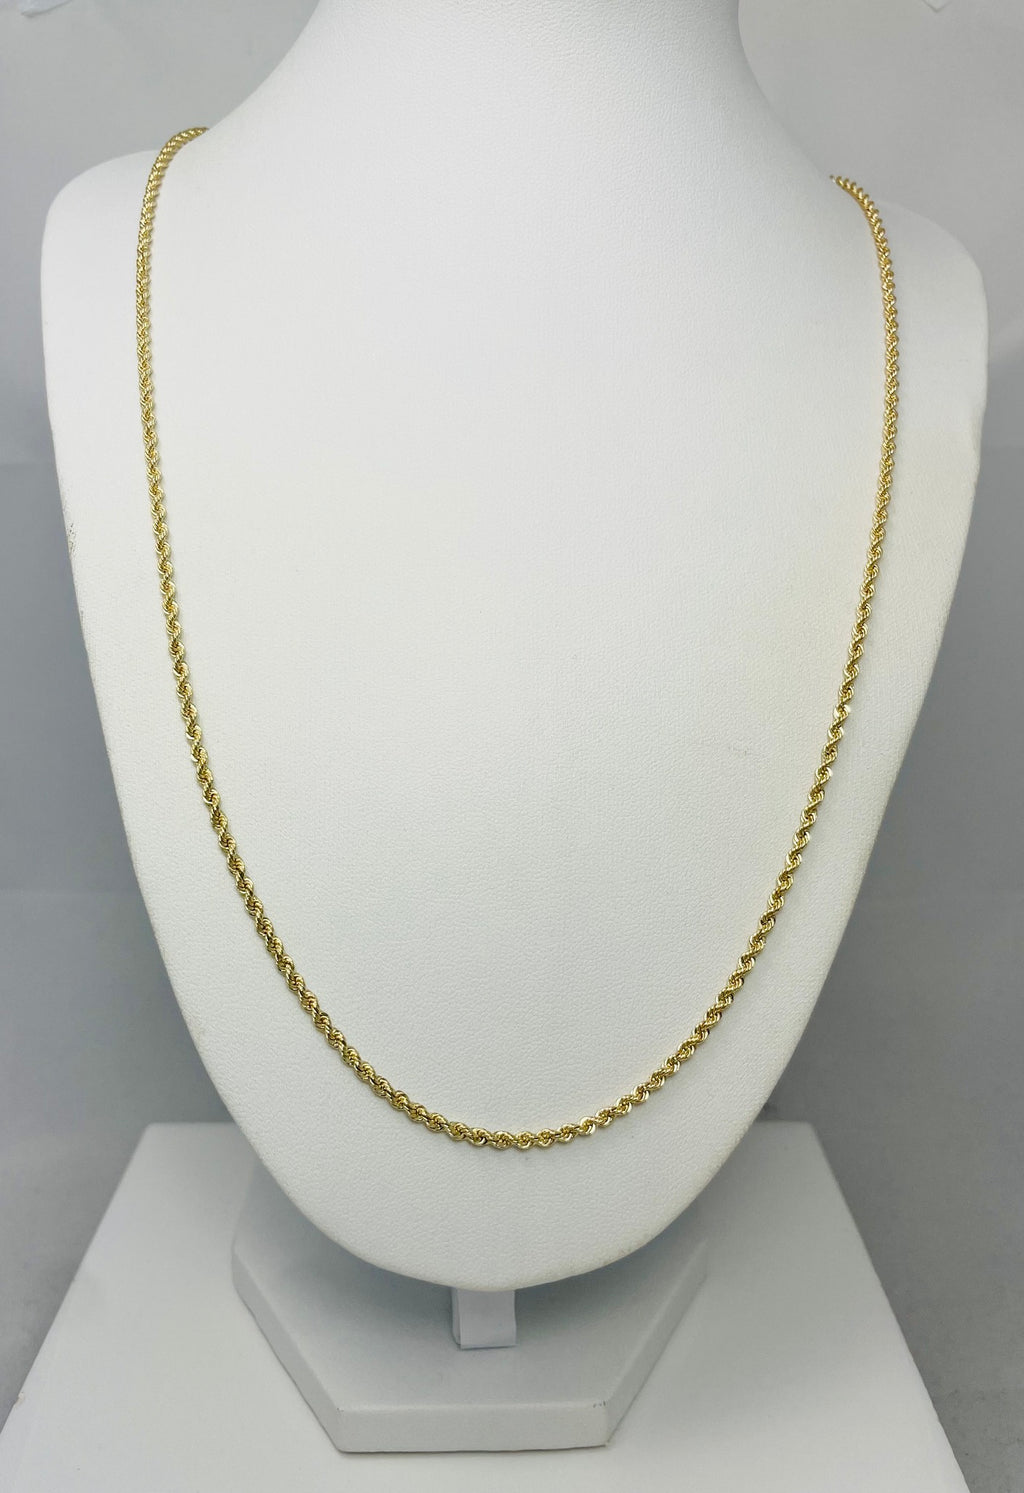 26" 14k Solid Yellow Gold Rope Chain Necklace